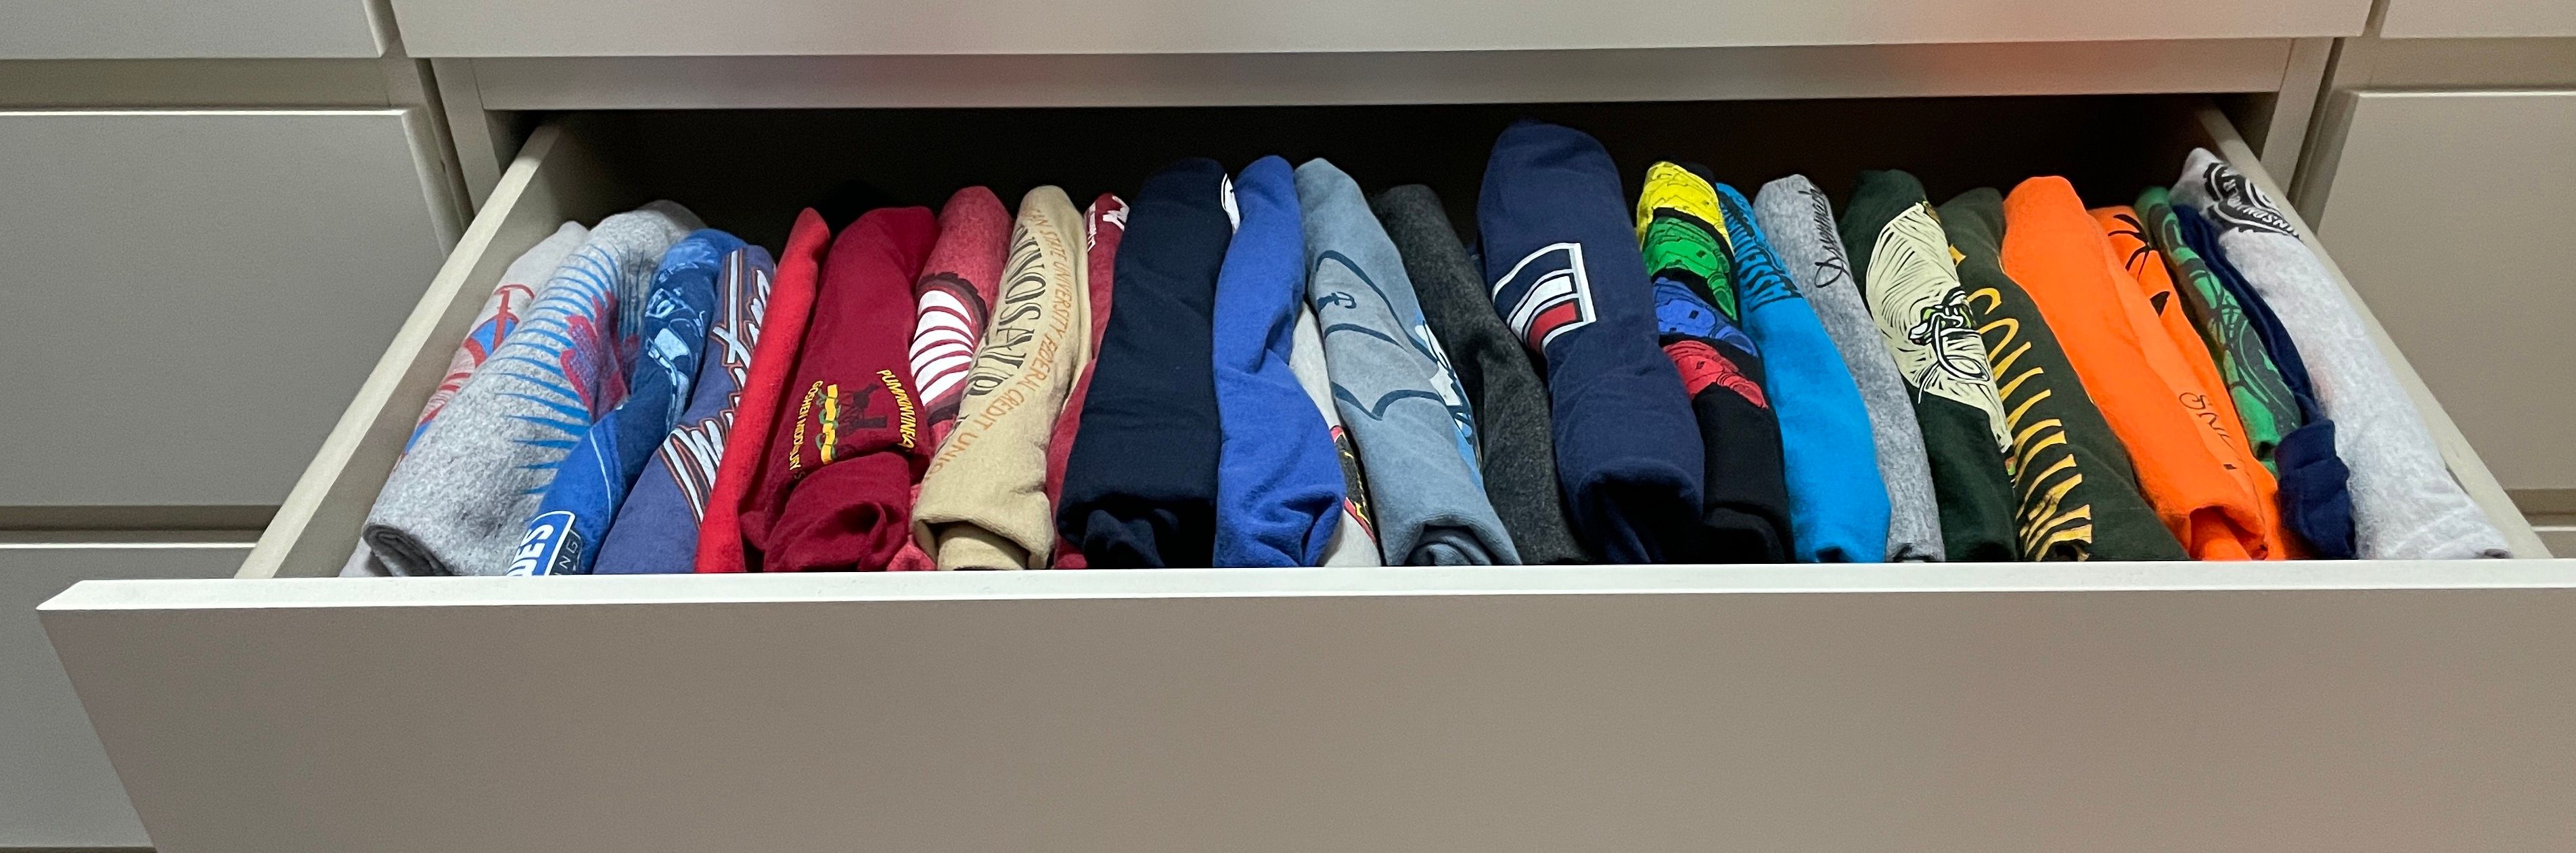 T-shirts in a drawer